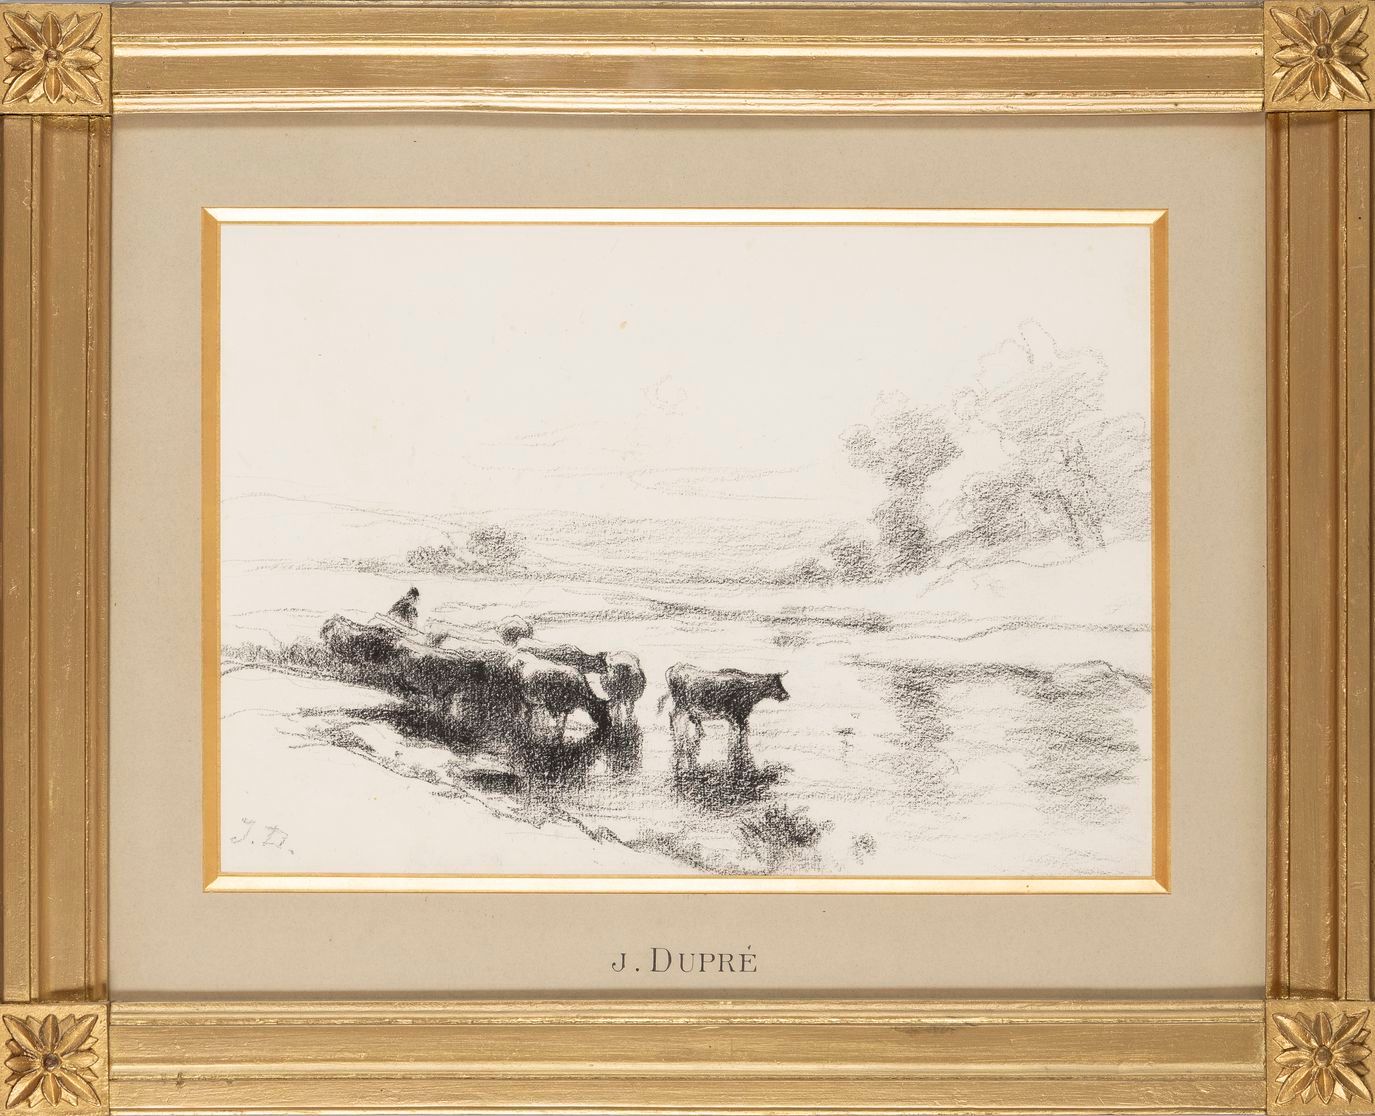 Null 12. Jules DUPRÉ (1811-1899). Herd and Shepherd at the Pond. Charcoal drawin&hellip;